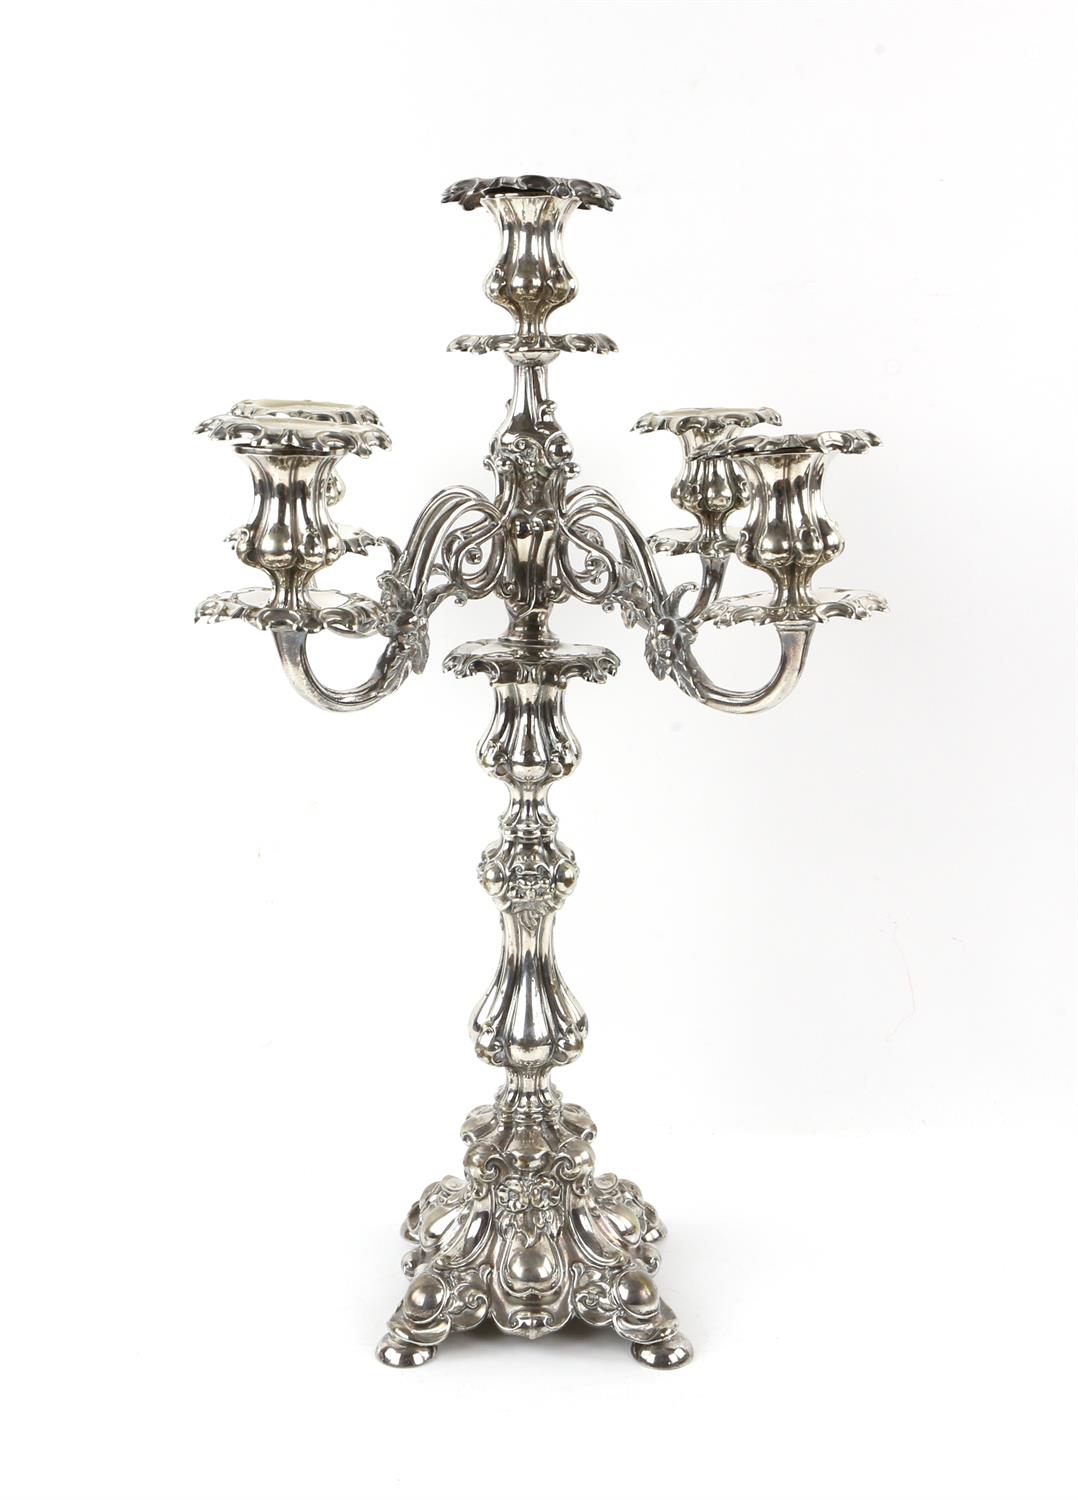 Pair of German silver plated five-light candelabra by Henniger, on waisted columns, - Image 10 of 11